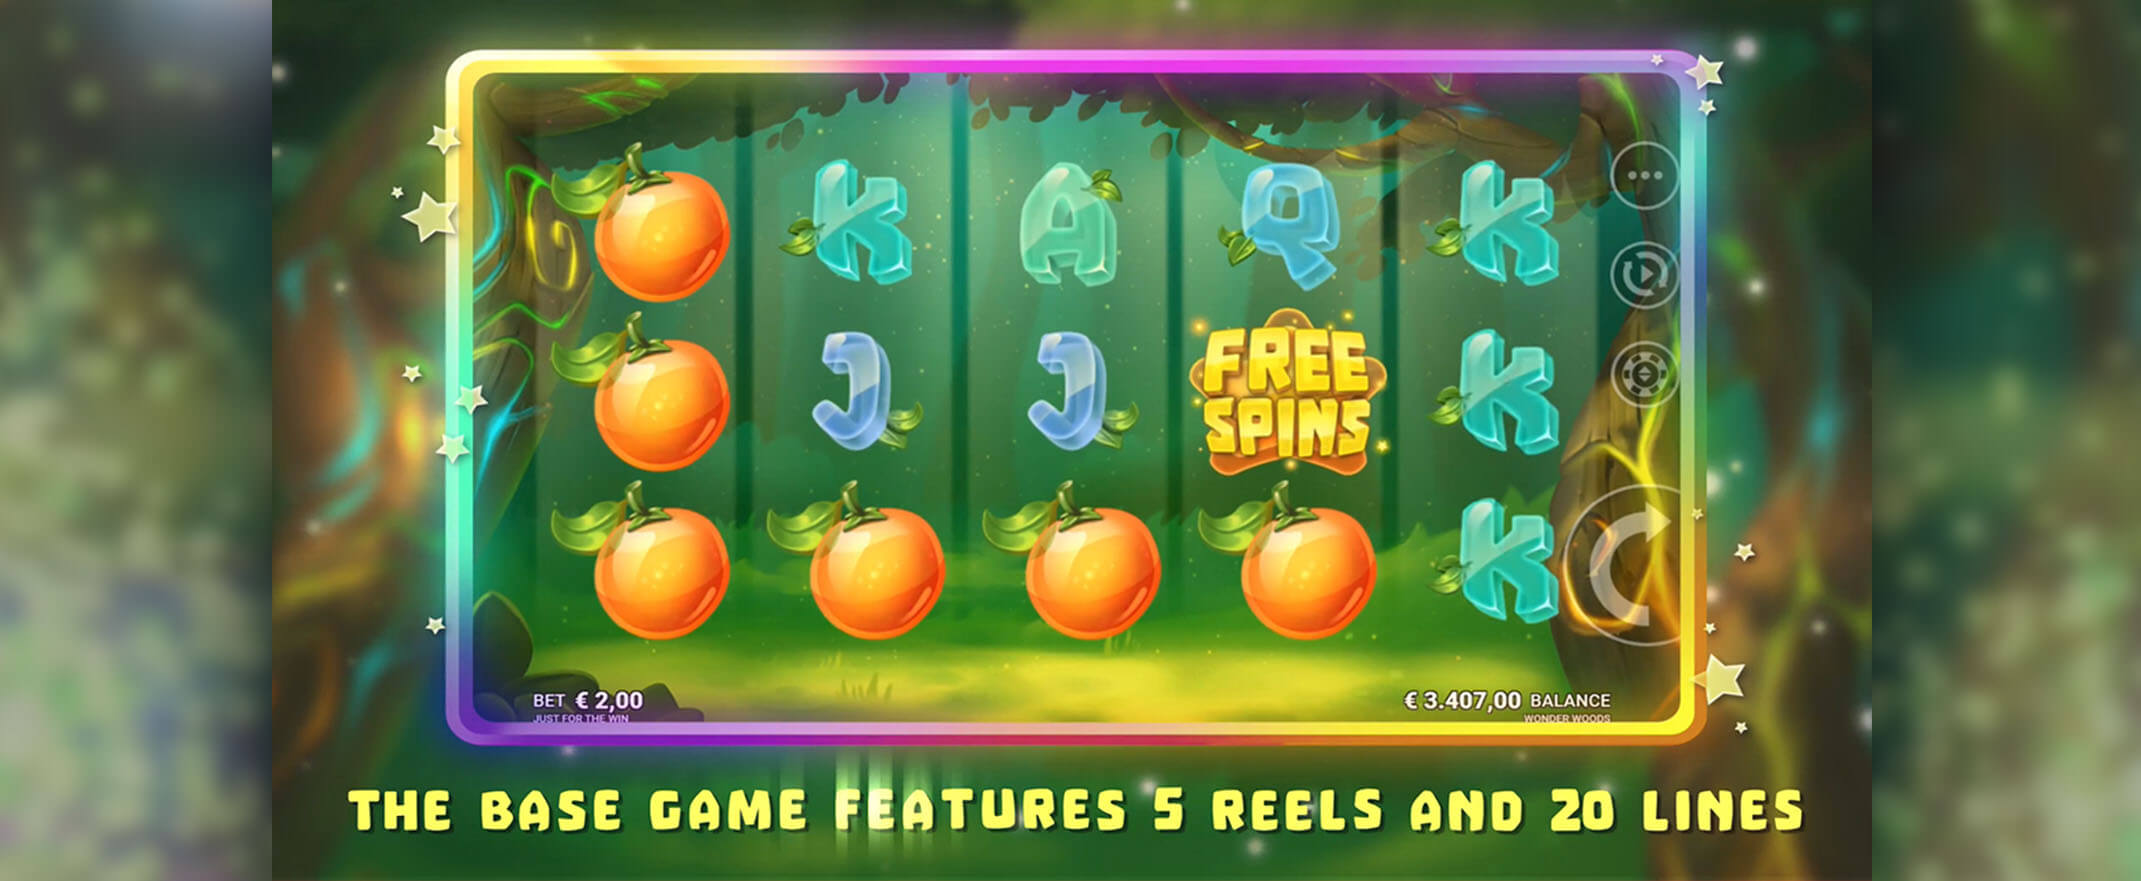 Wonder Woods slot from Just For The Win - a screenshot of the reels